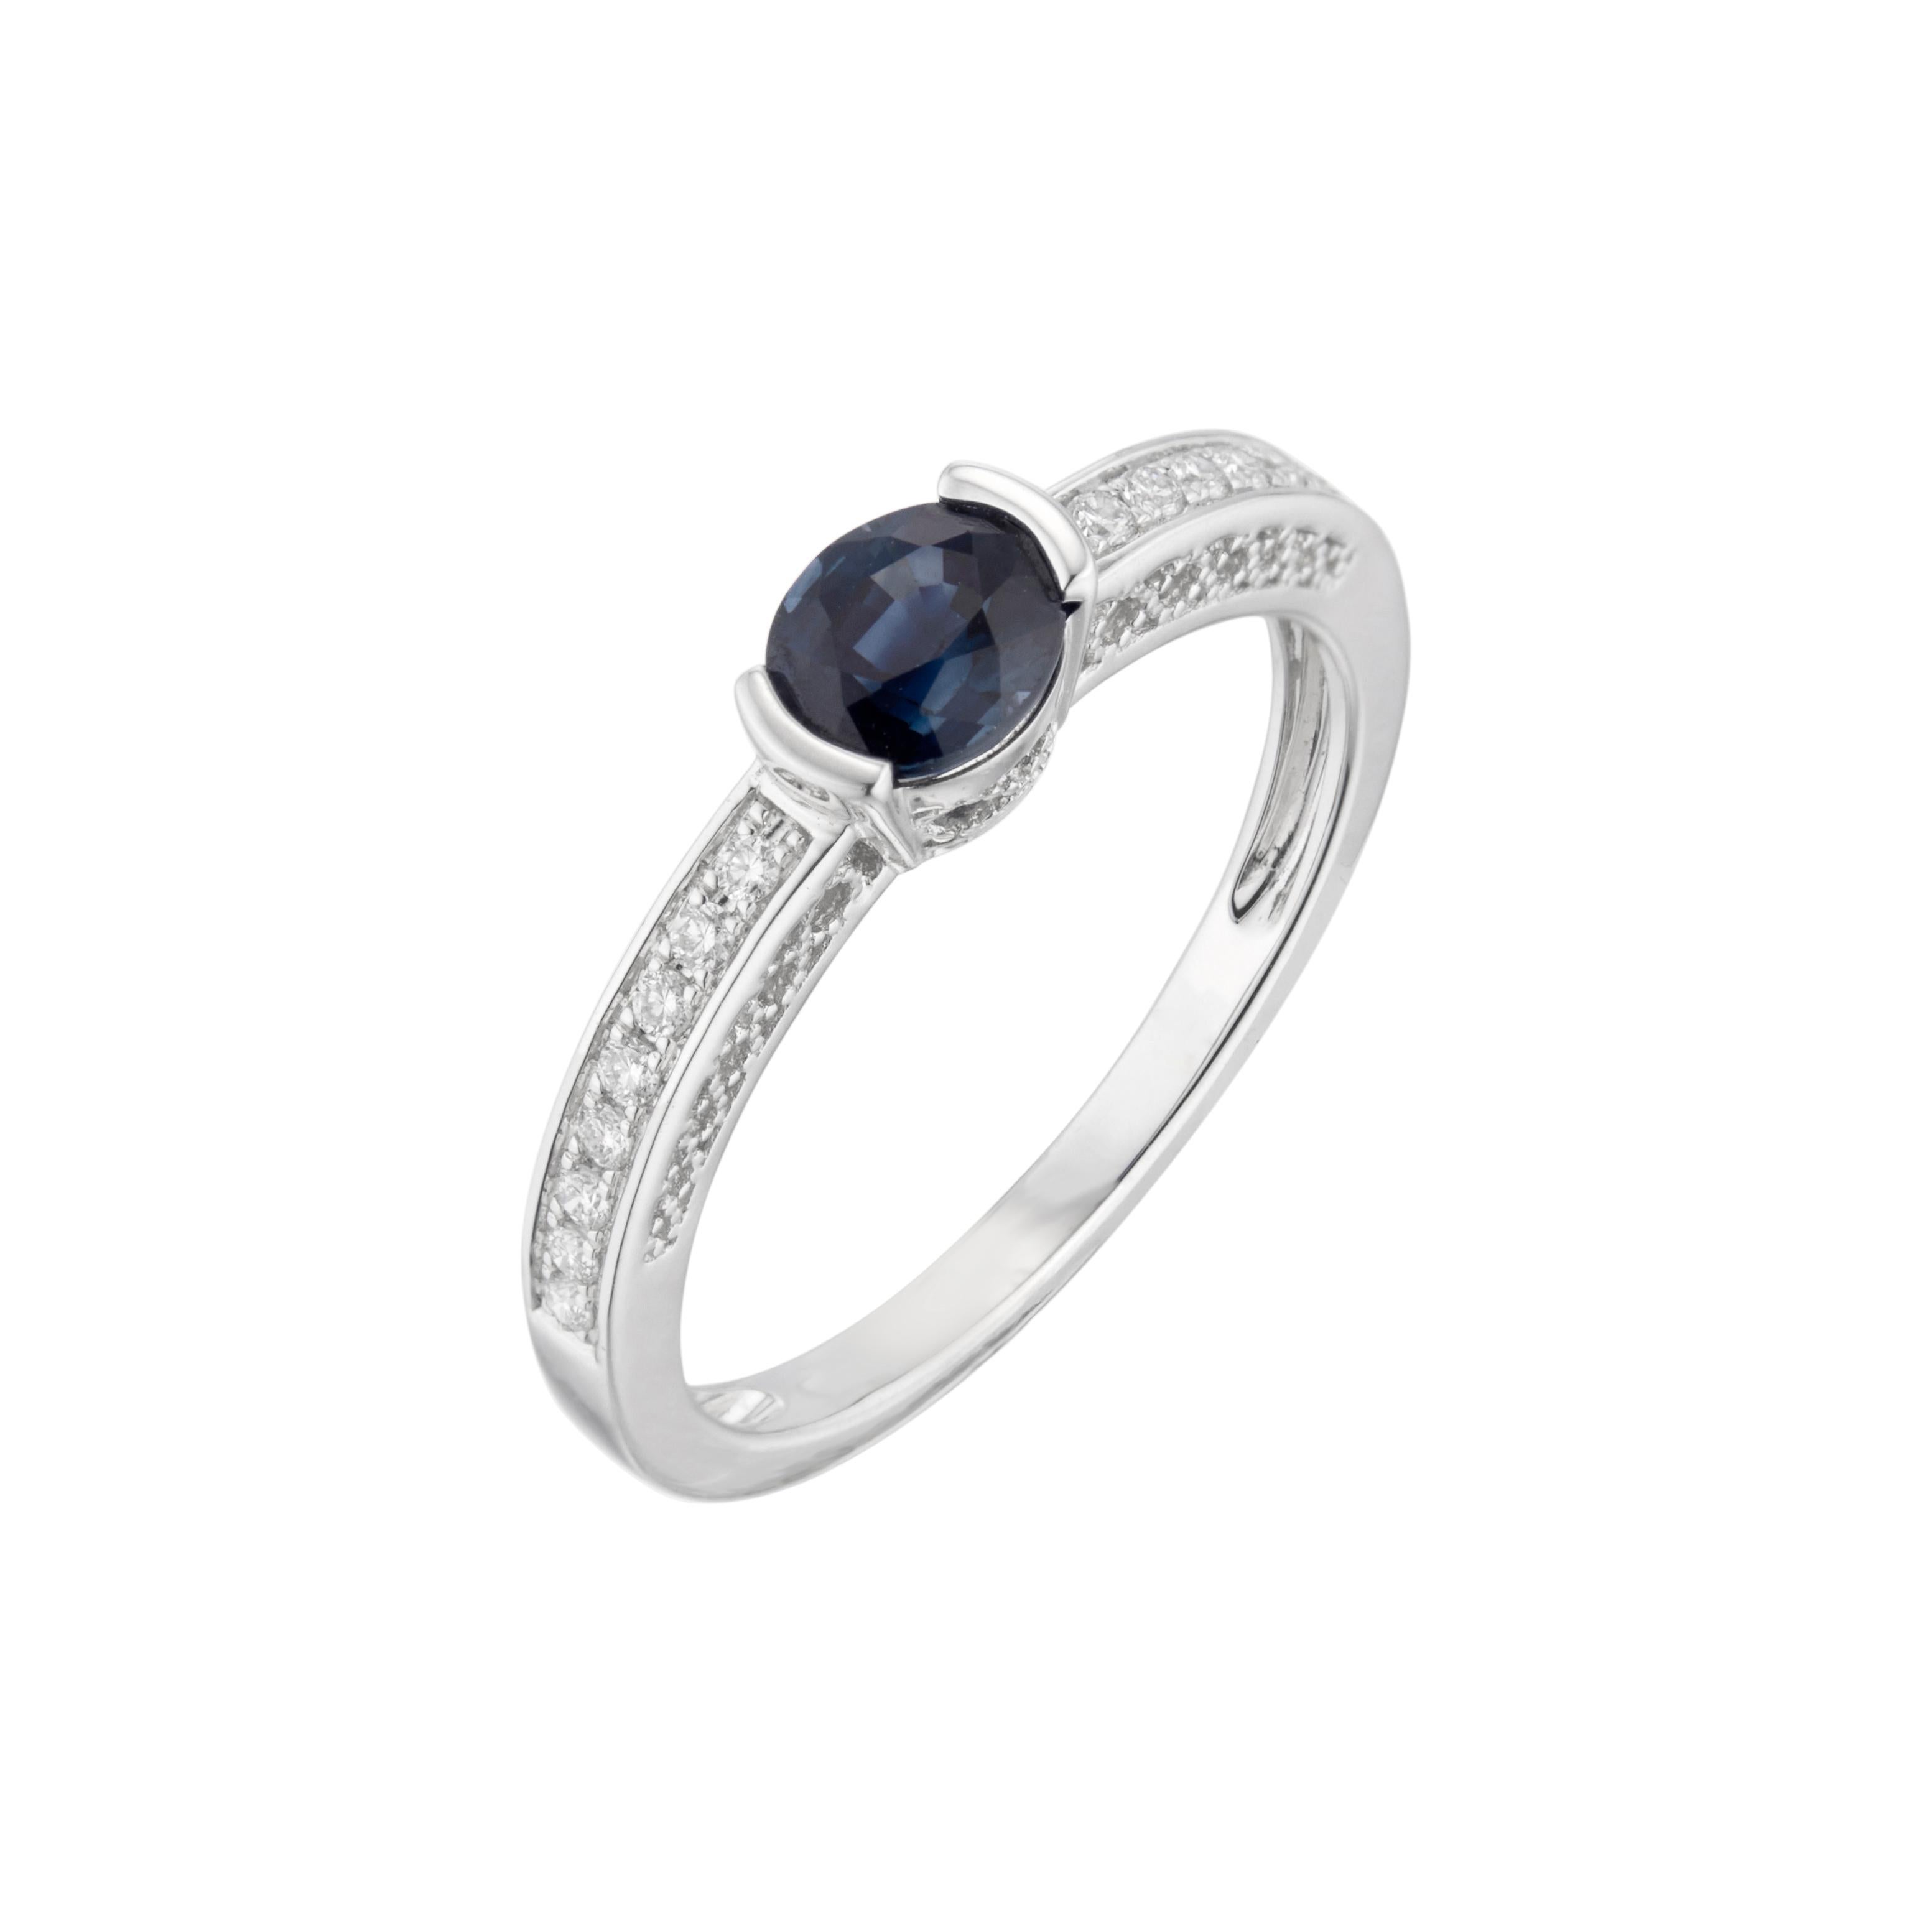 Sapphire and diamond engagement ring. Side set oval center sapphire set in a 14k white gold setting with 16 diamonds along both sides of the shank. 

1 oval blue sapphire, approx. .83cts
16 diamonds, G VS-SI approx. .12cts
Size 7 and sizable
14k